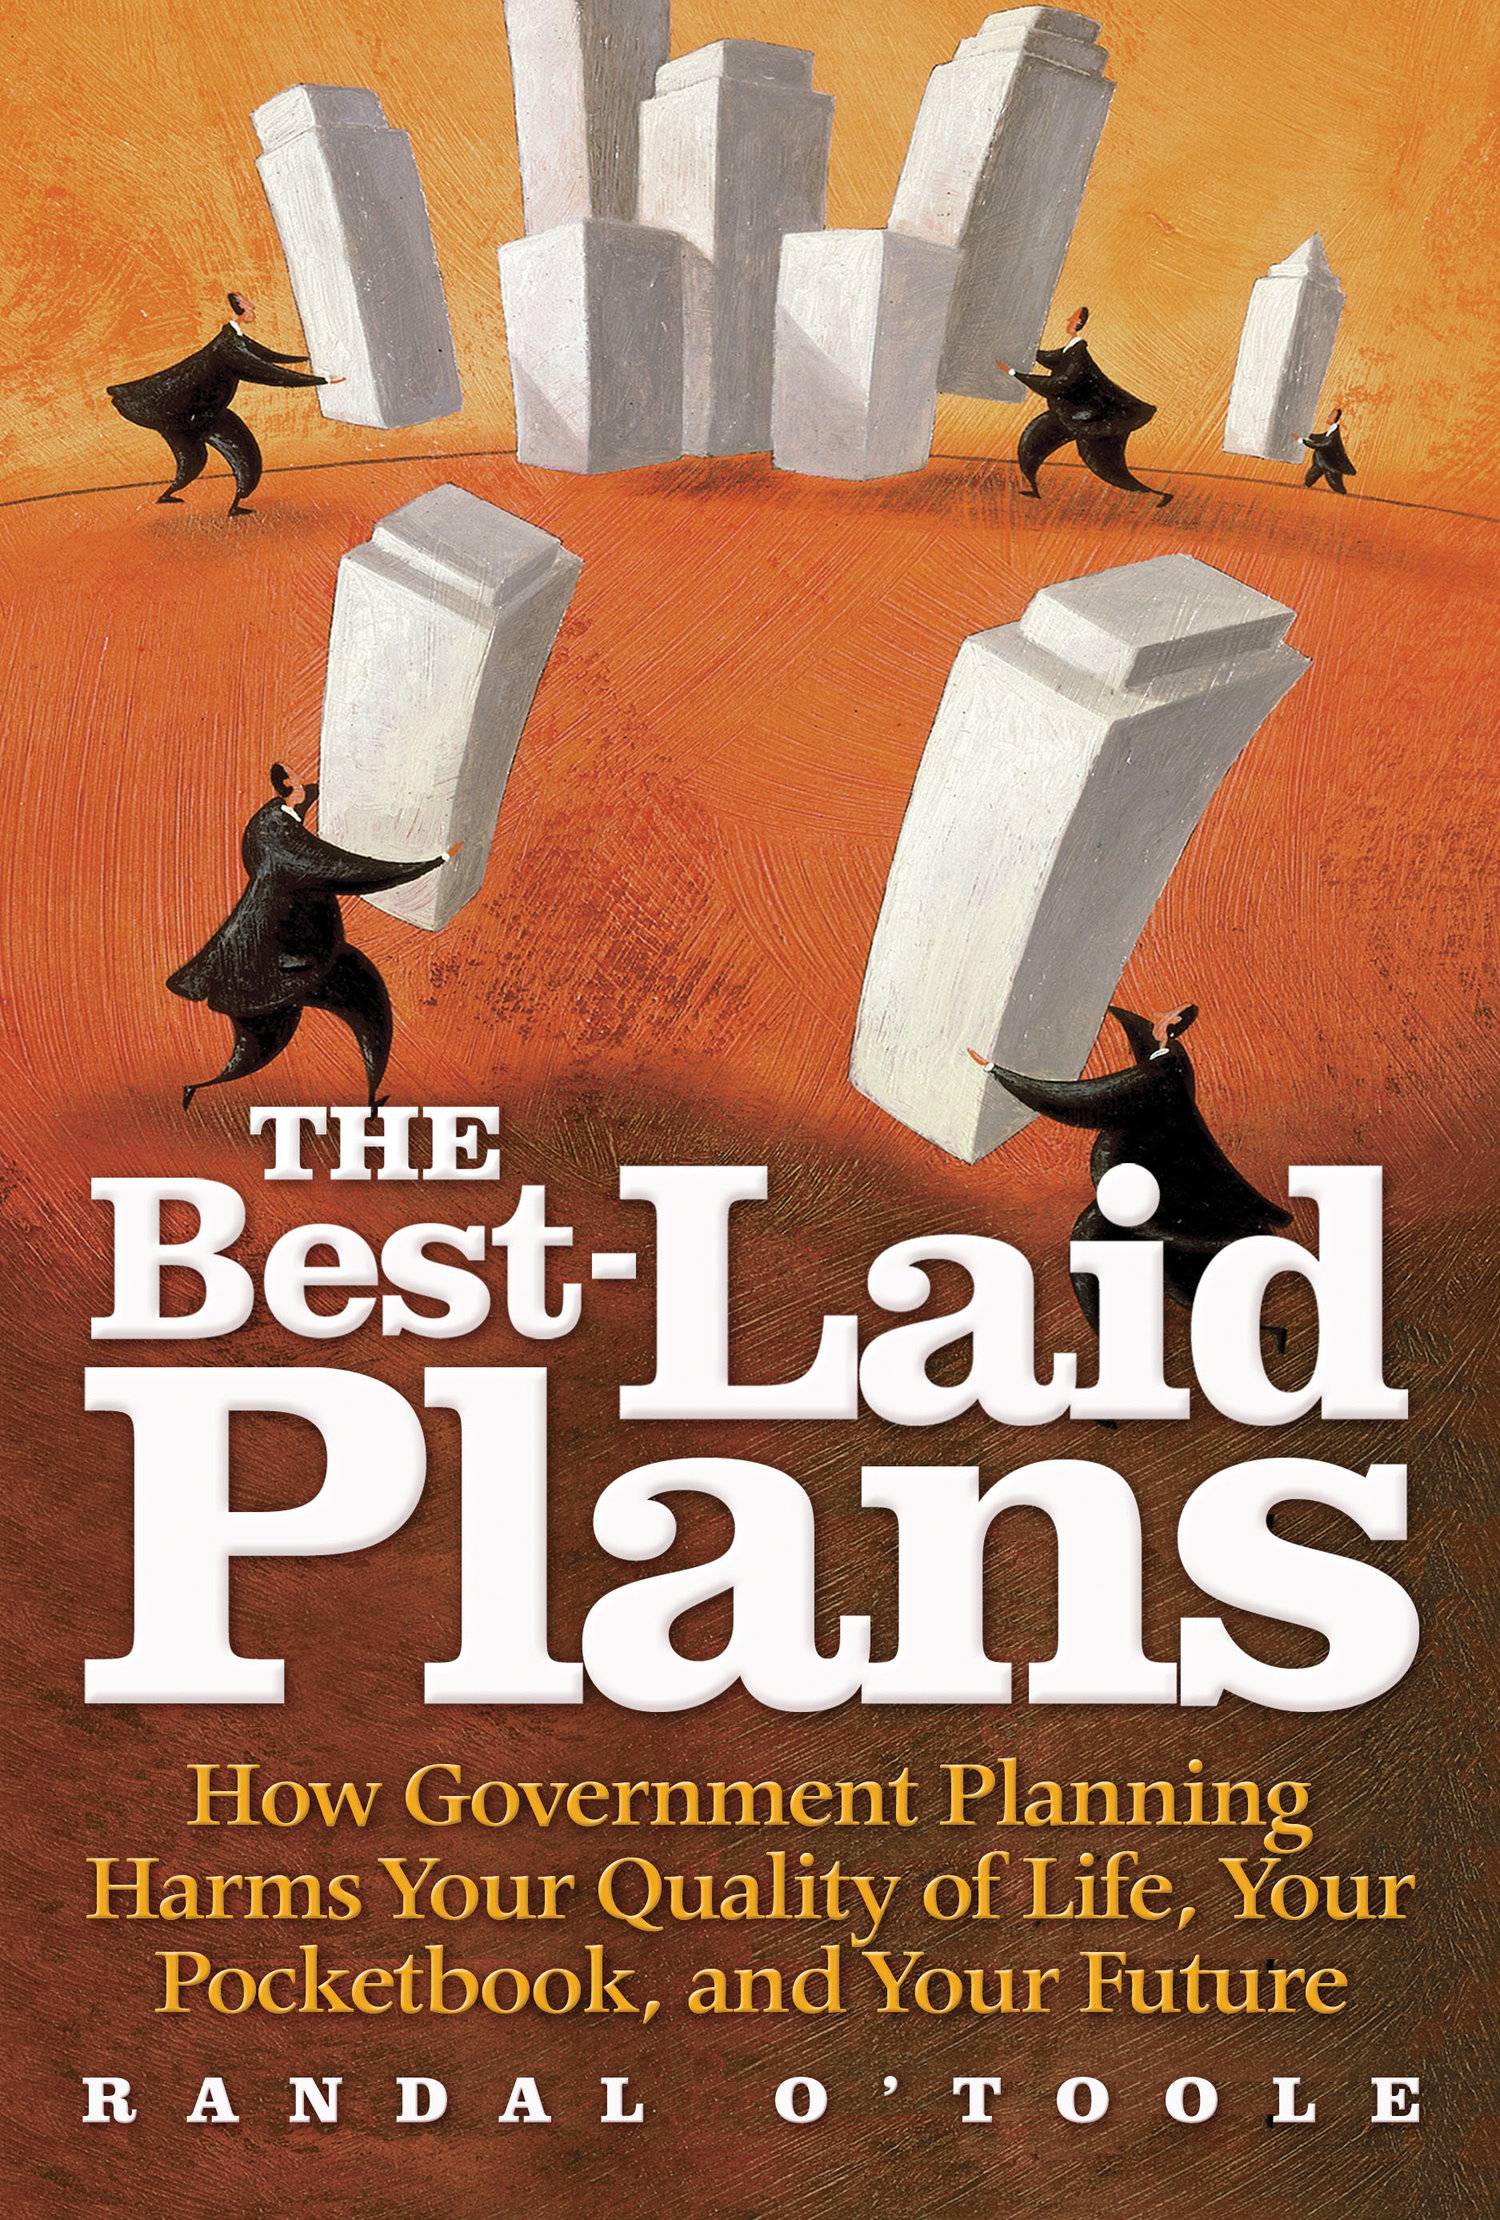 Government plans